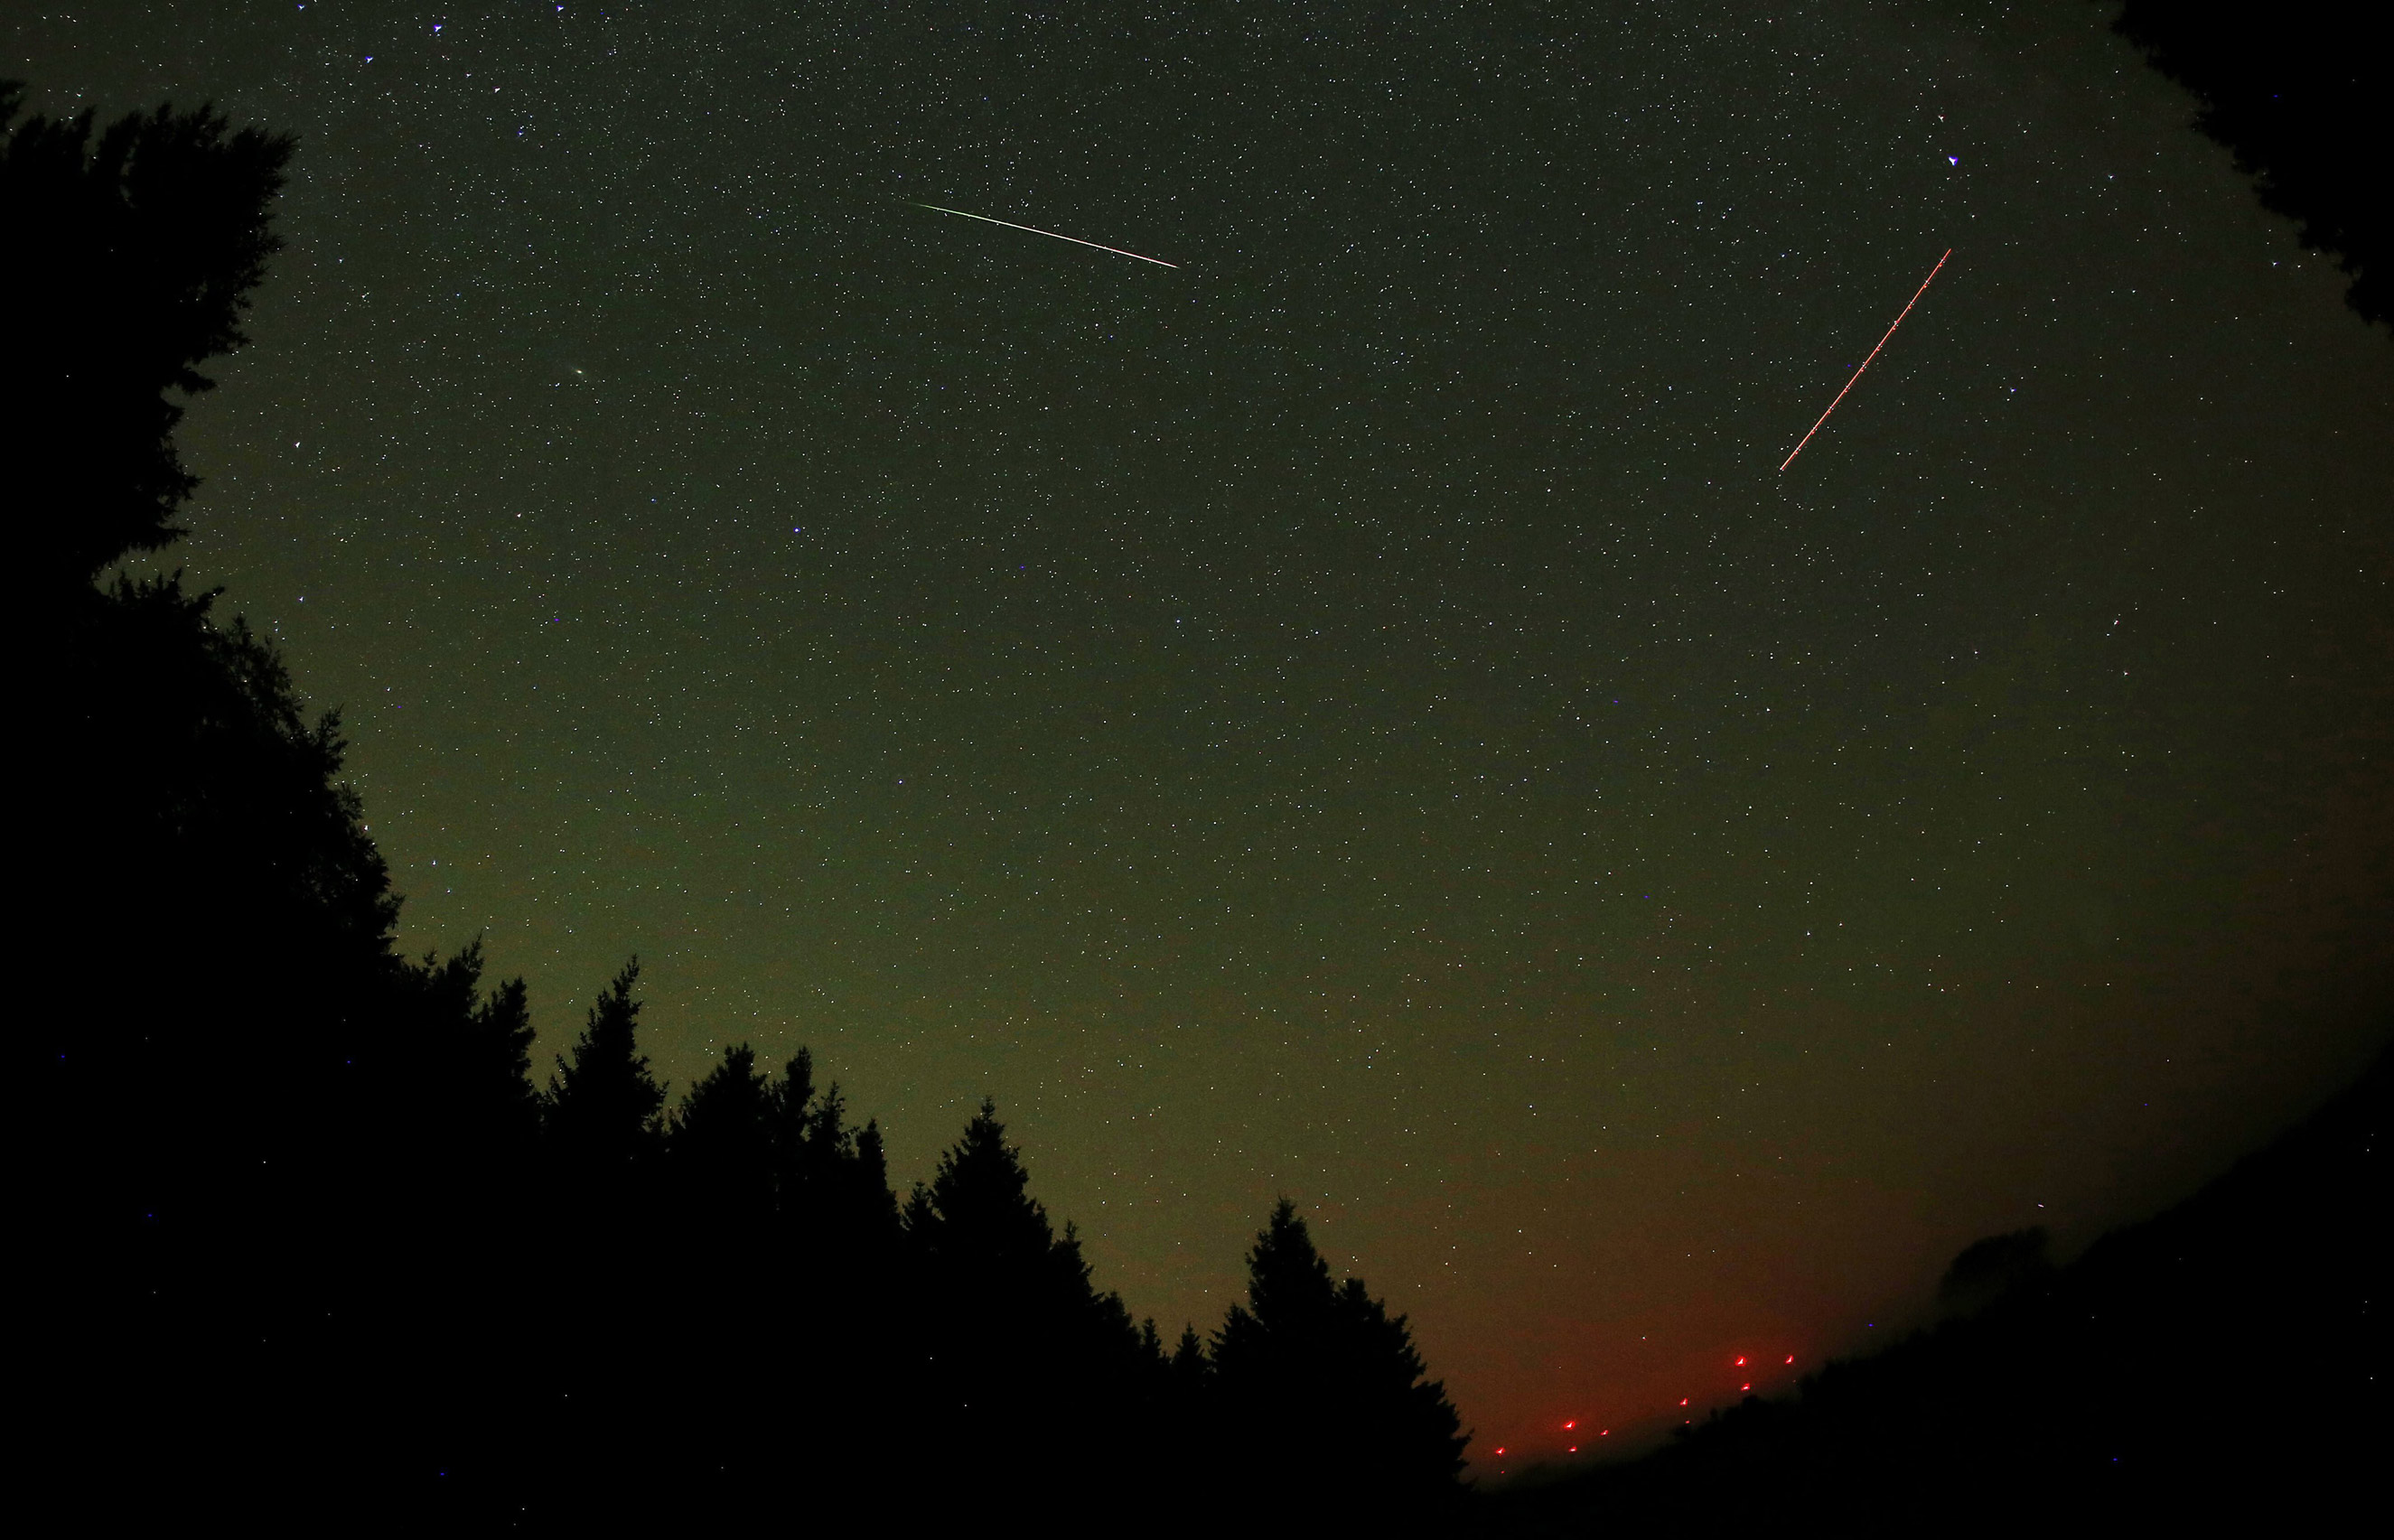 A meteor from the Perseid meteor shower (left) and the lights from a plane (right) streak across the sky near Gemuend, Germany on Aug. 13, 2015.